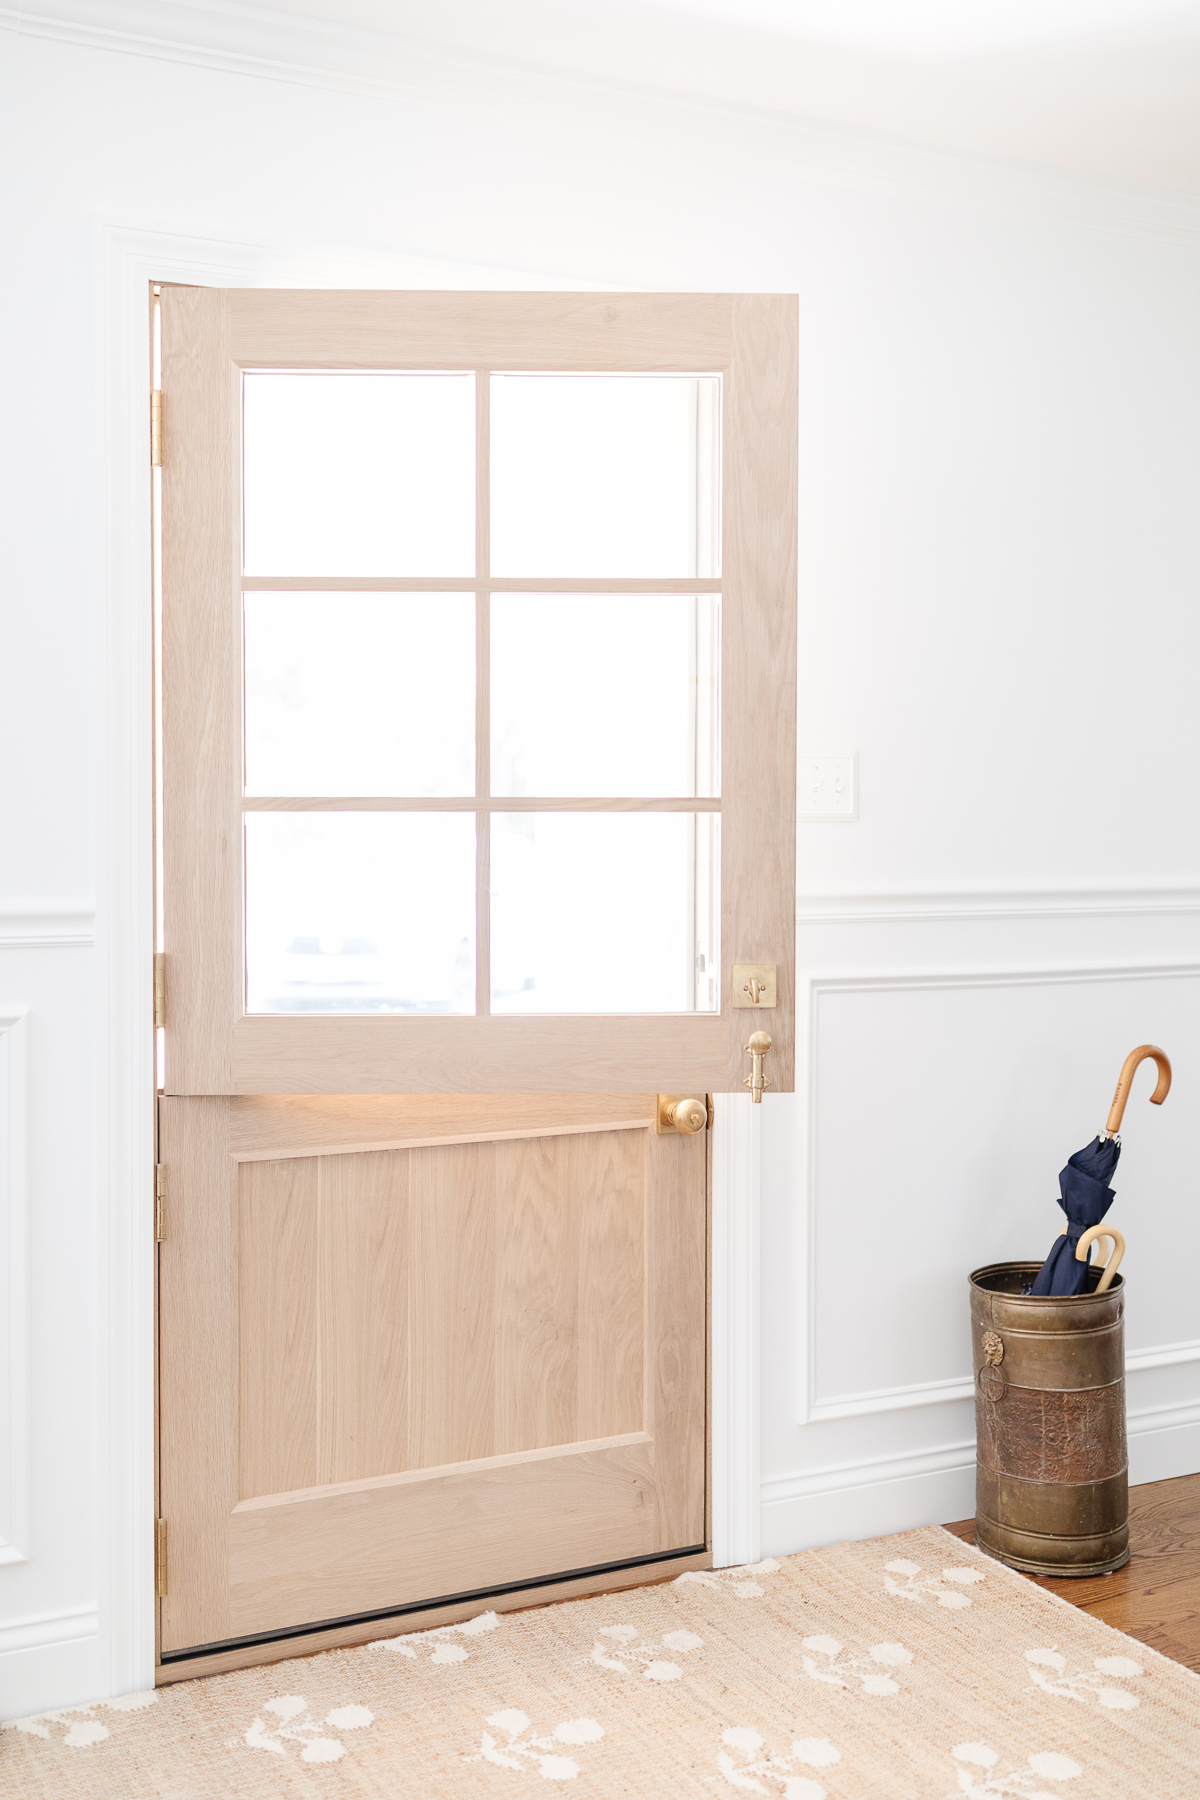 A light wood Dutch door in a white painted entryway